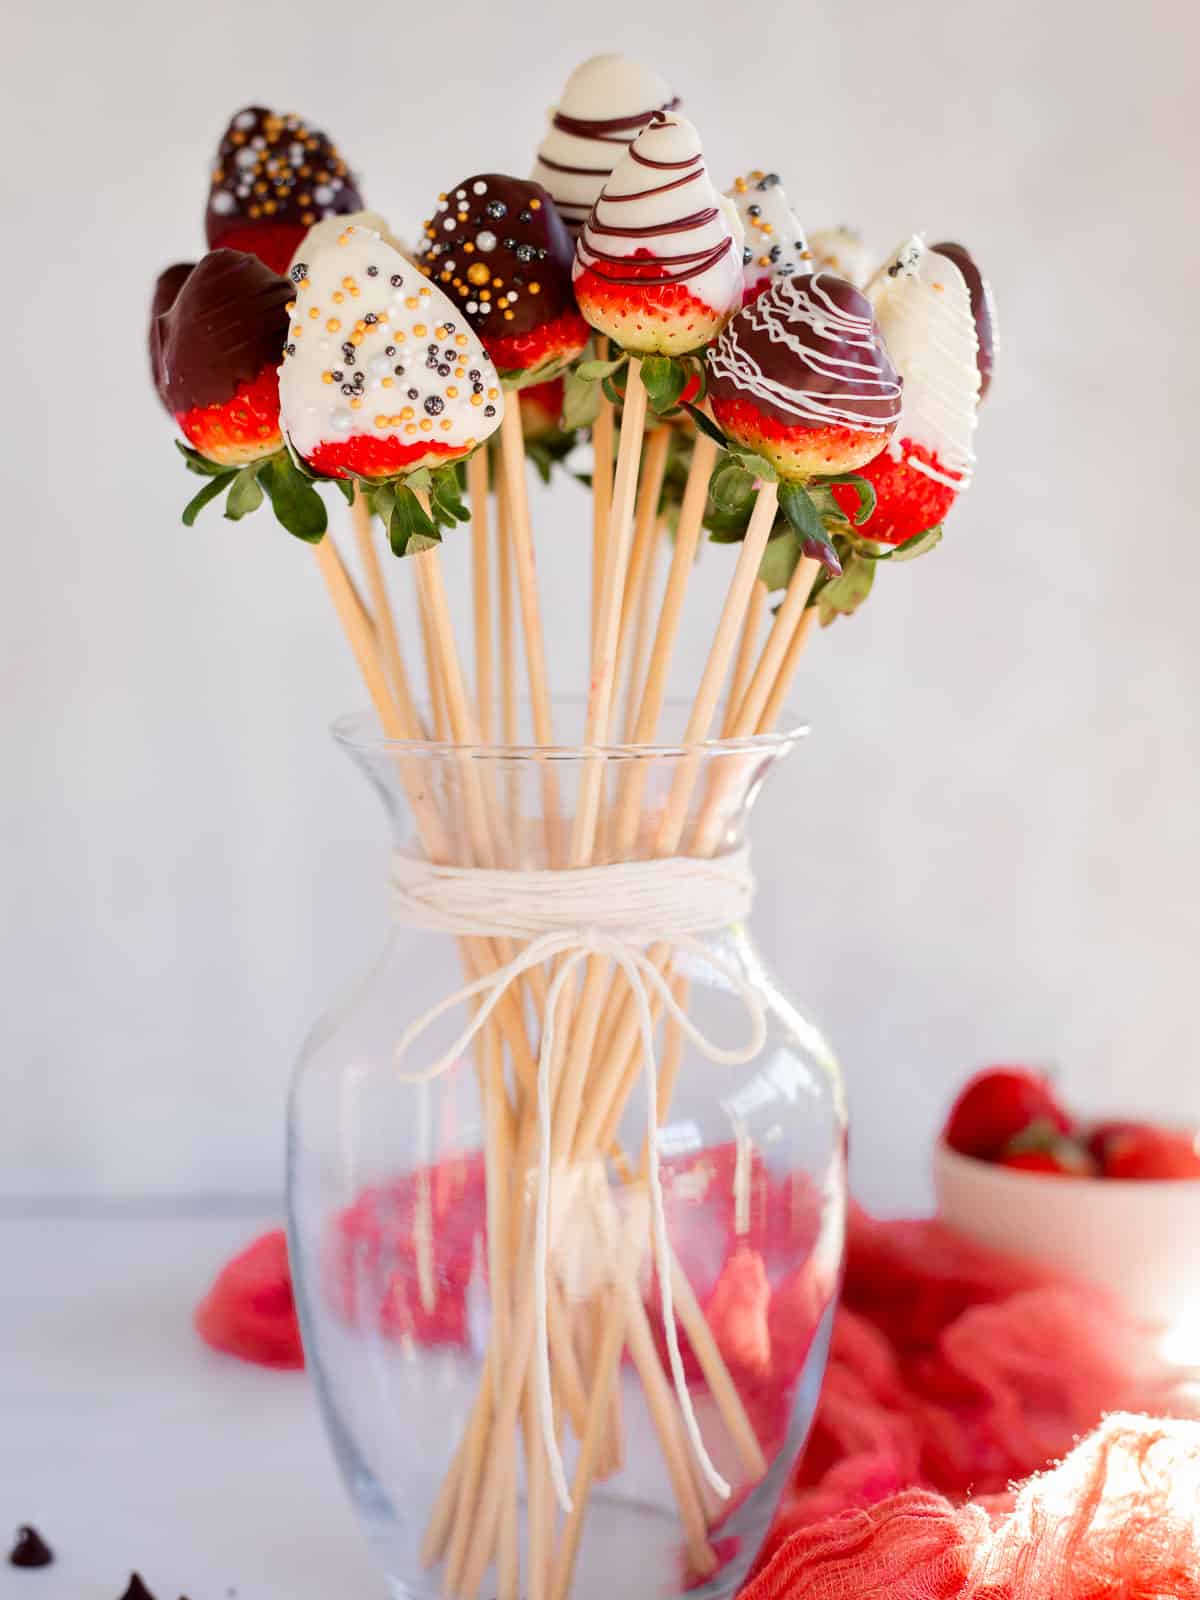 a homemade chocolate covered strawberry bouquet in a glass vase.